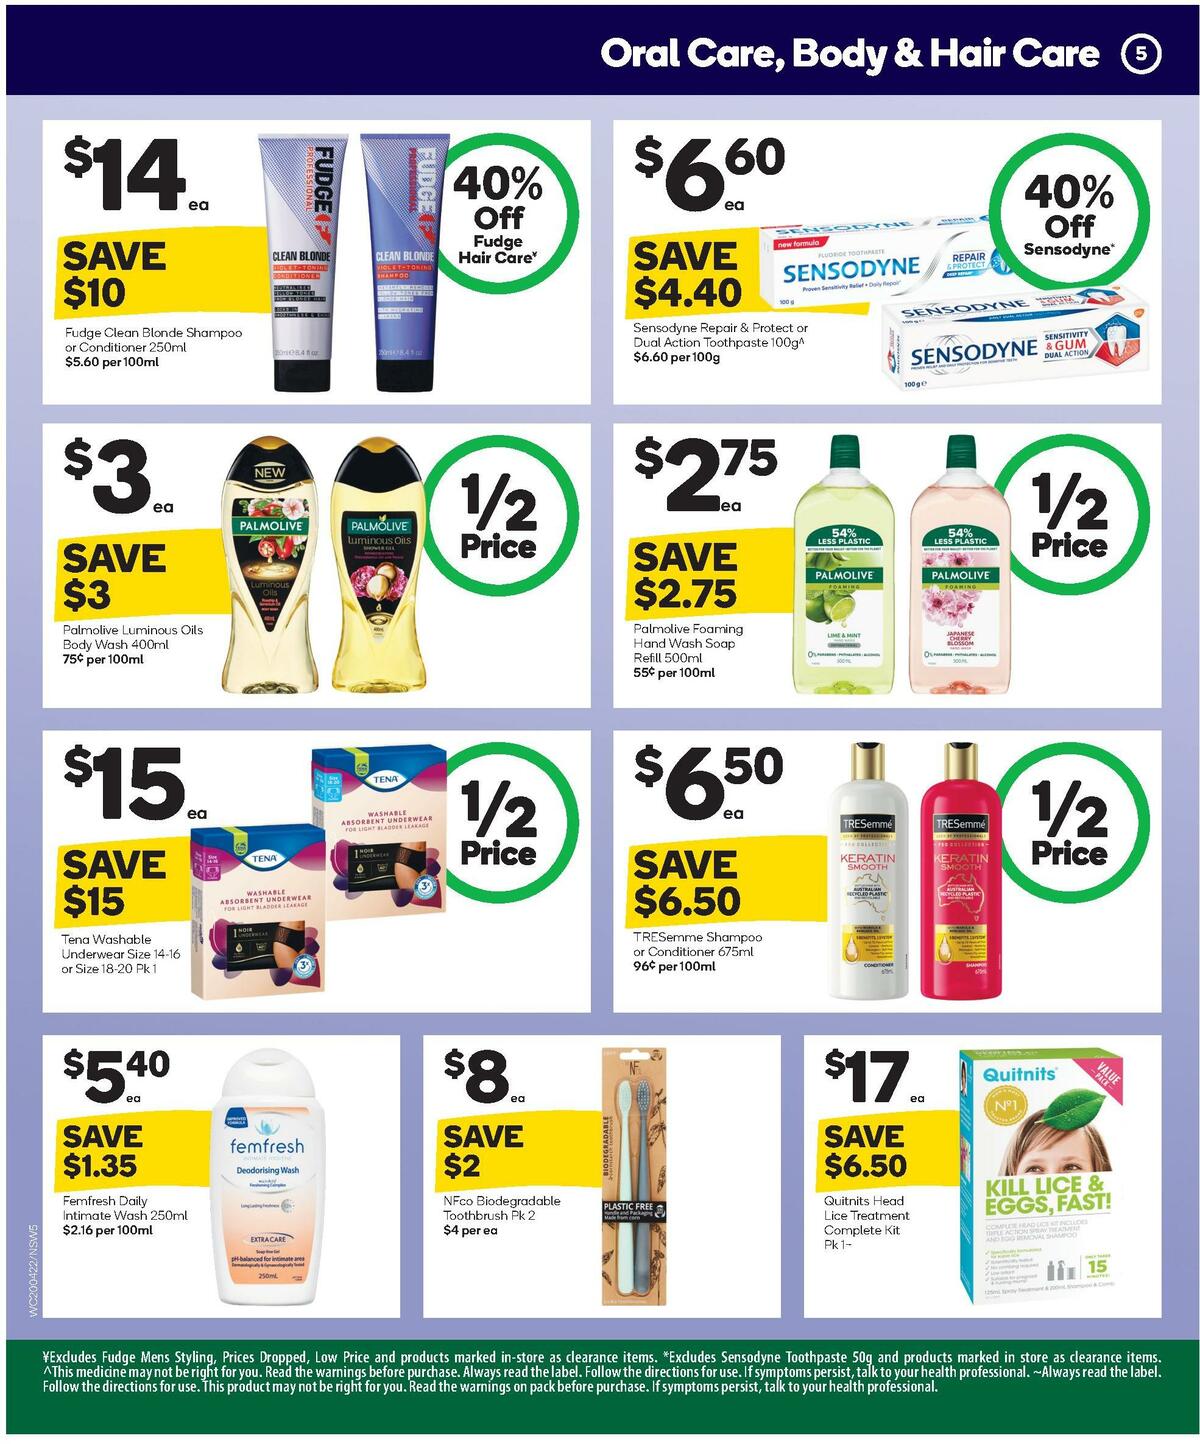 Woolworths Health & Beauty Catalogues from 20 April